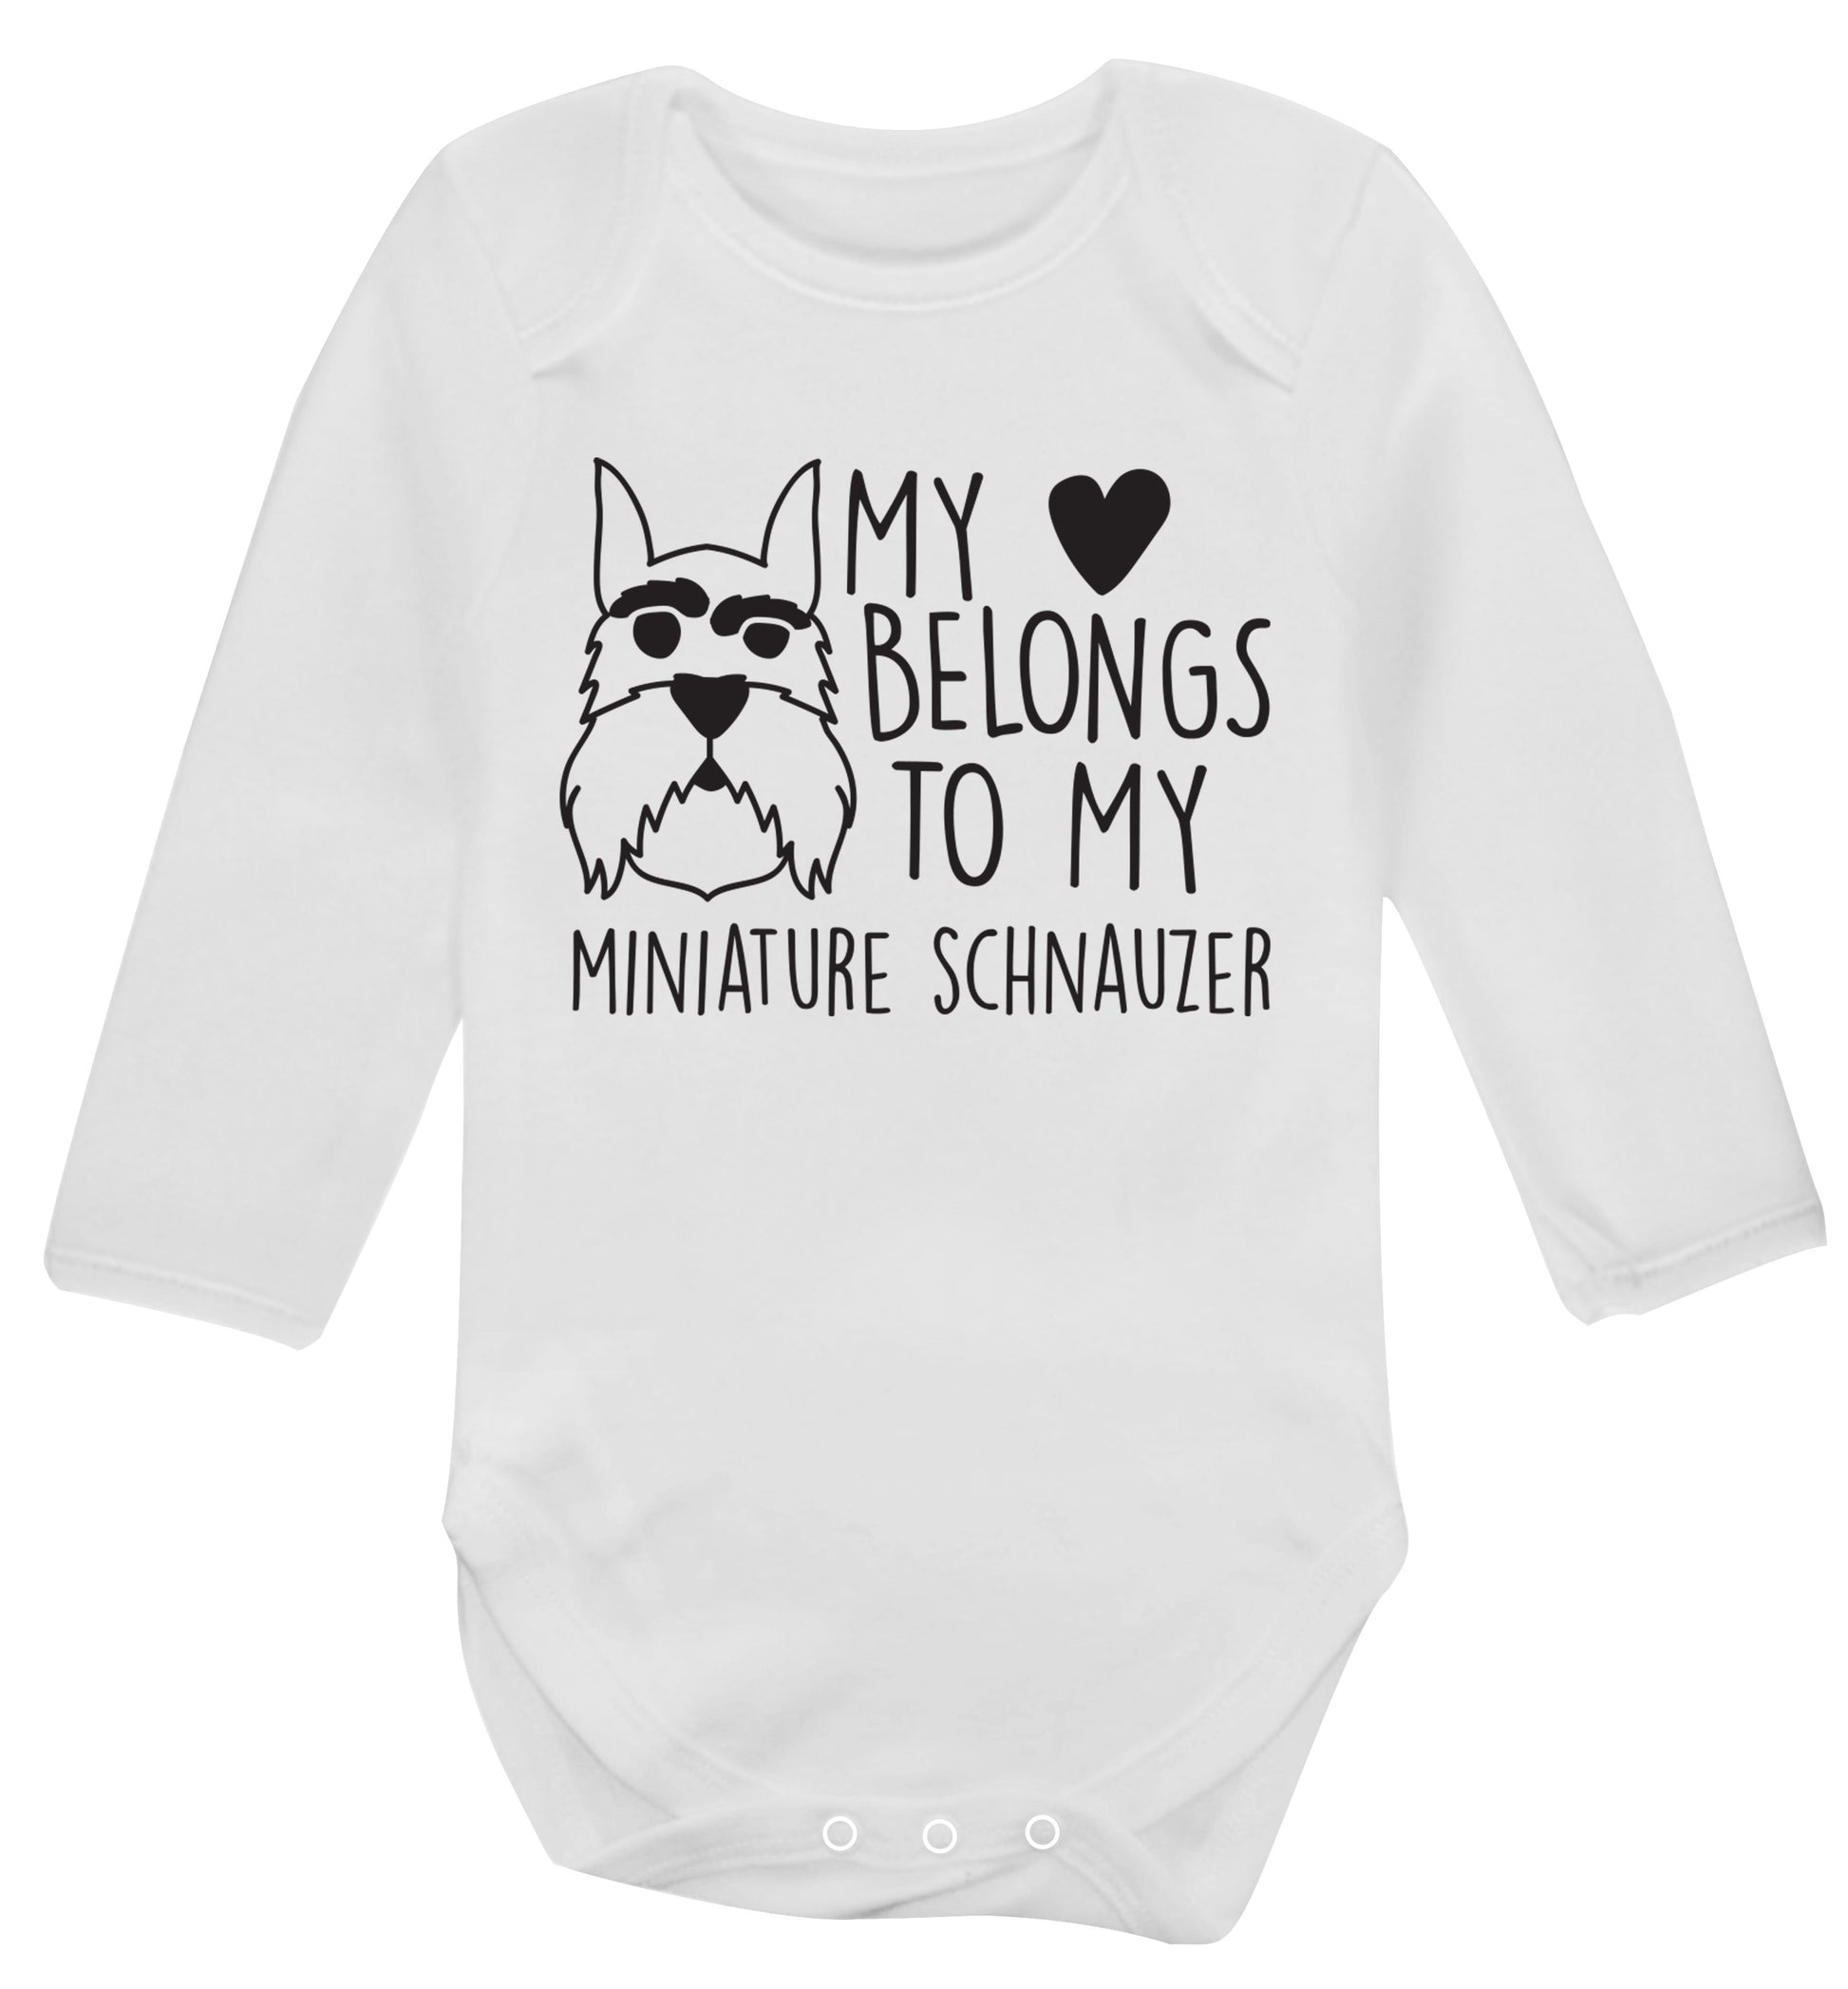 My heart belongs to my miniature schnauzer Baby Vest long sleeved white 6-12 months